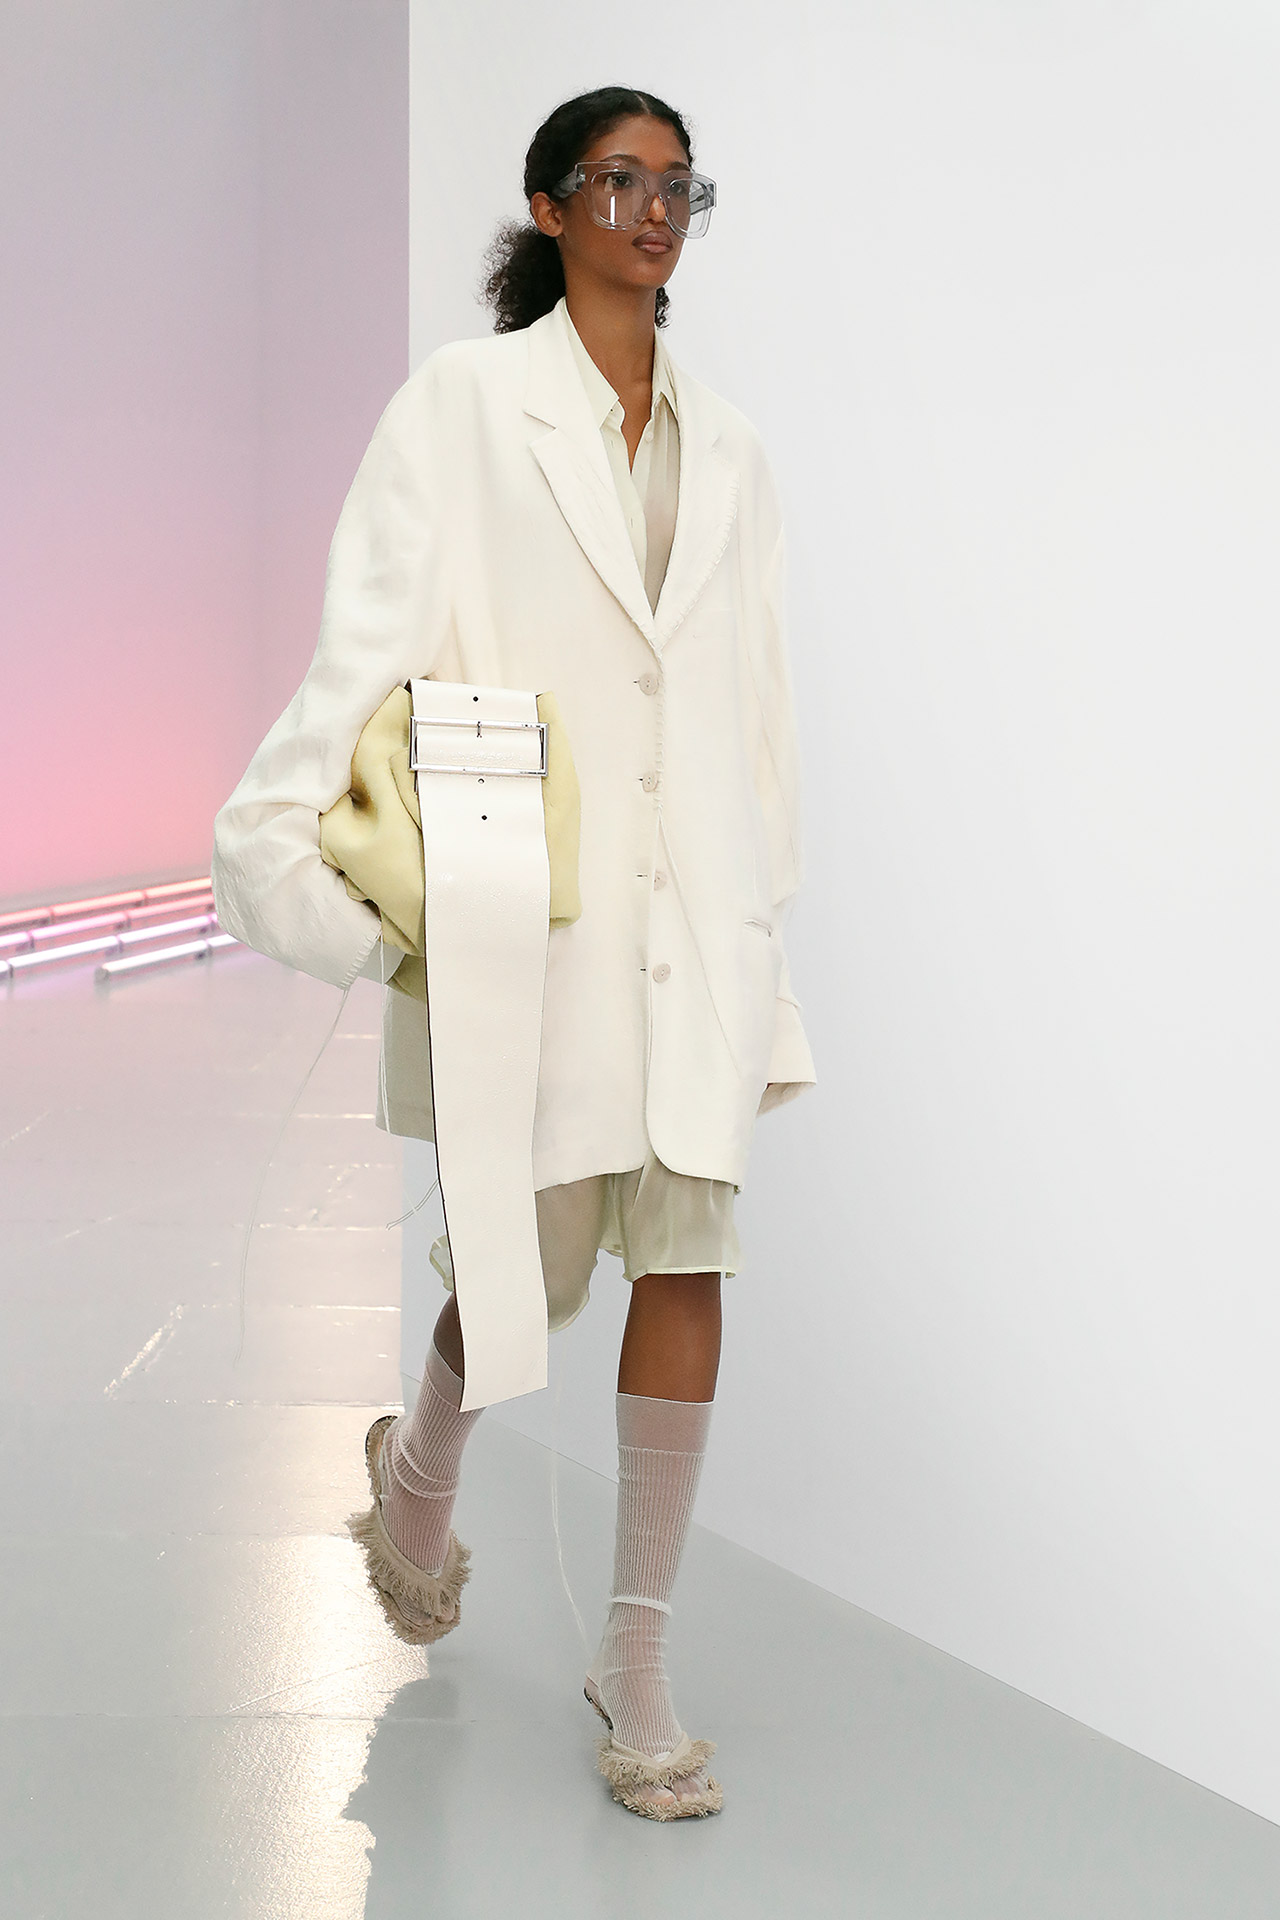 ACNESTUDIOS-1 – A Shaded View on Fashion